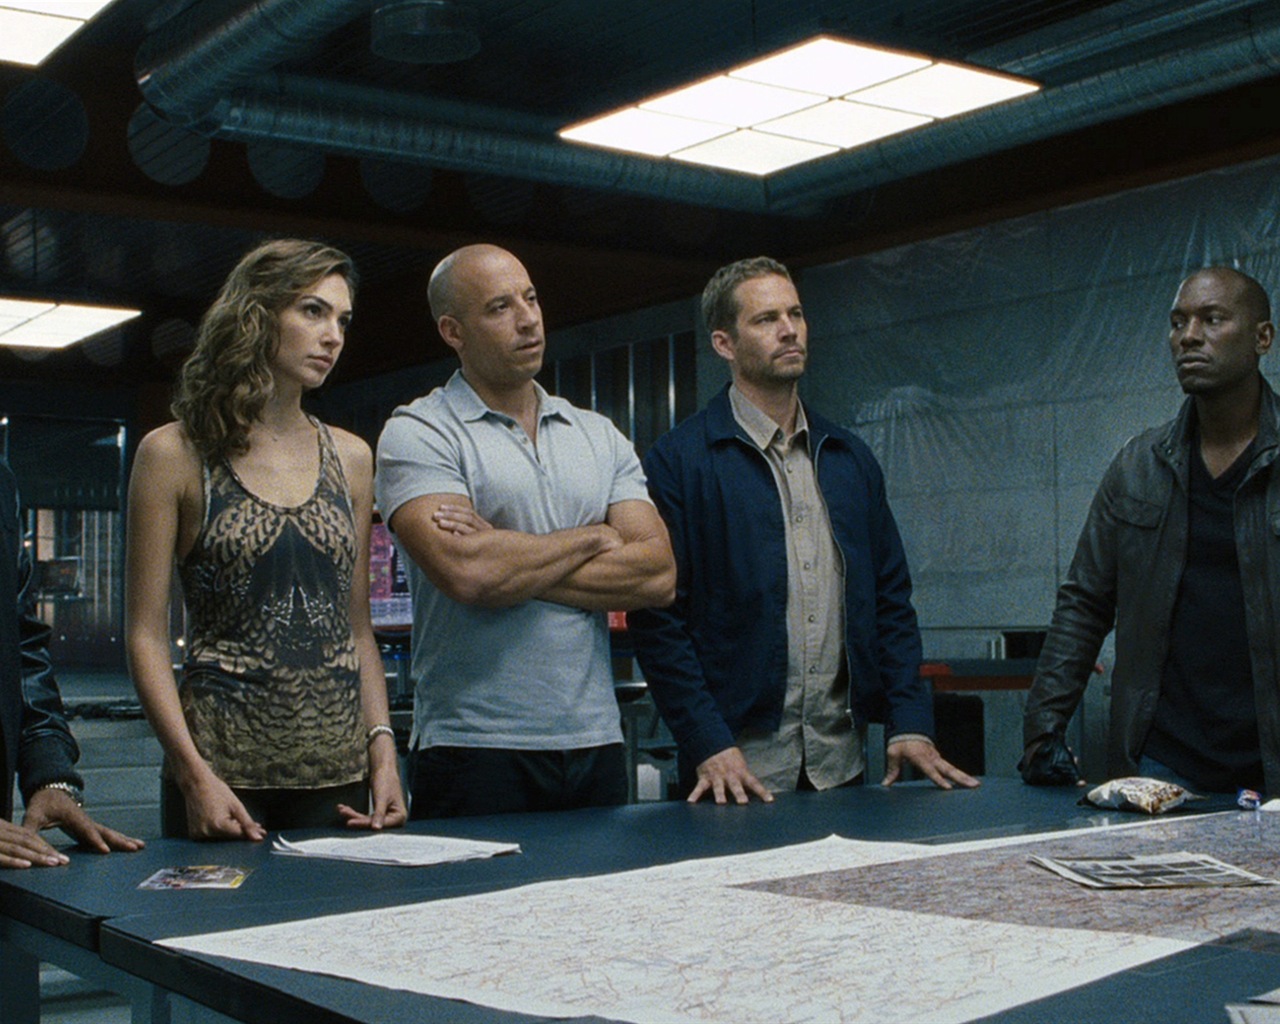 Fast And Furious 6 HD movie wallpapers #2 - 1280x1024